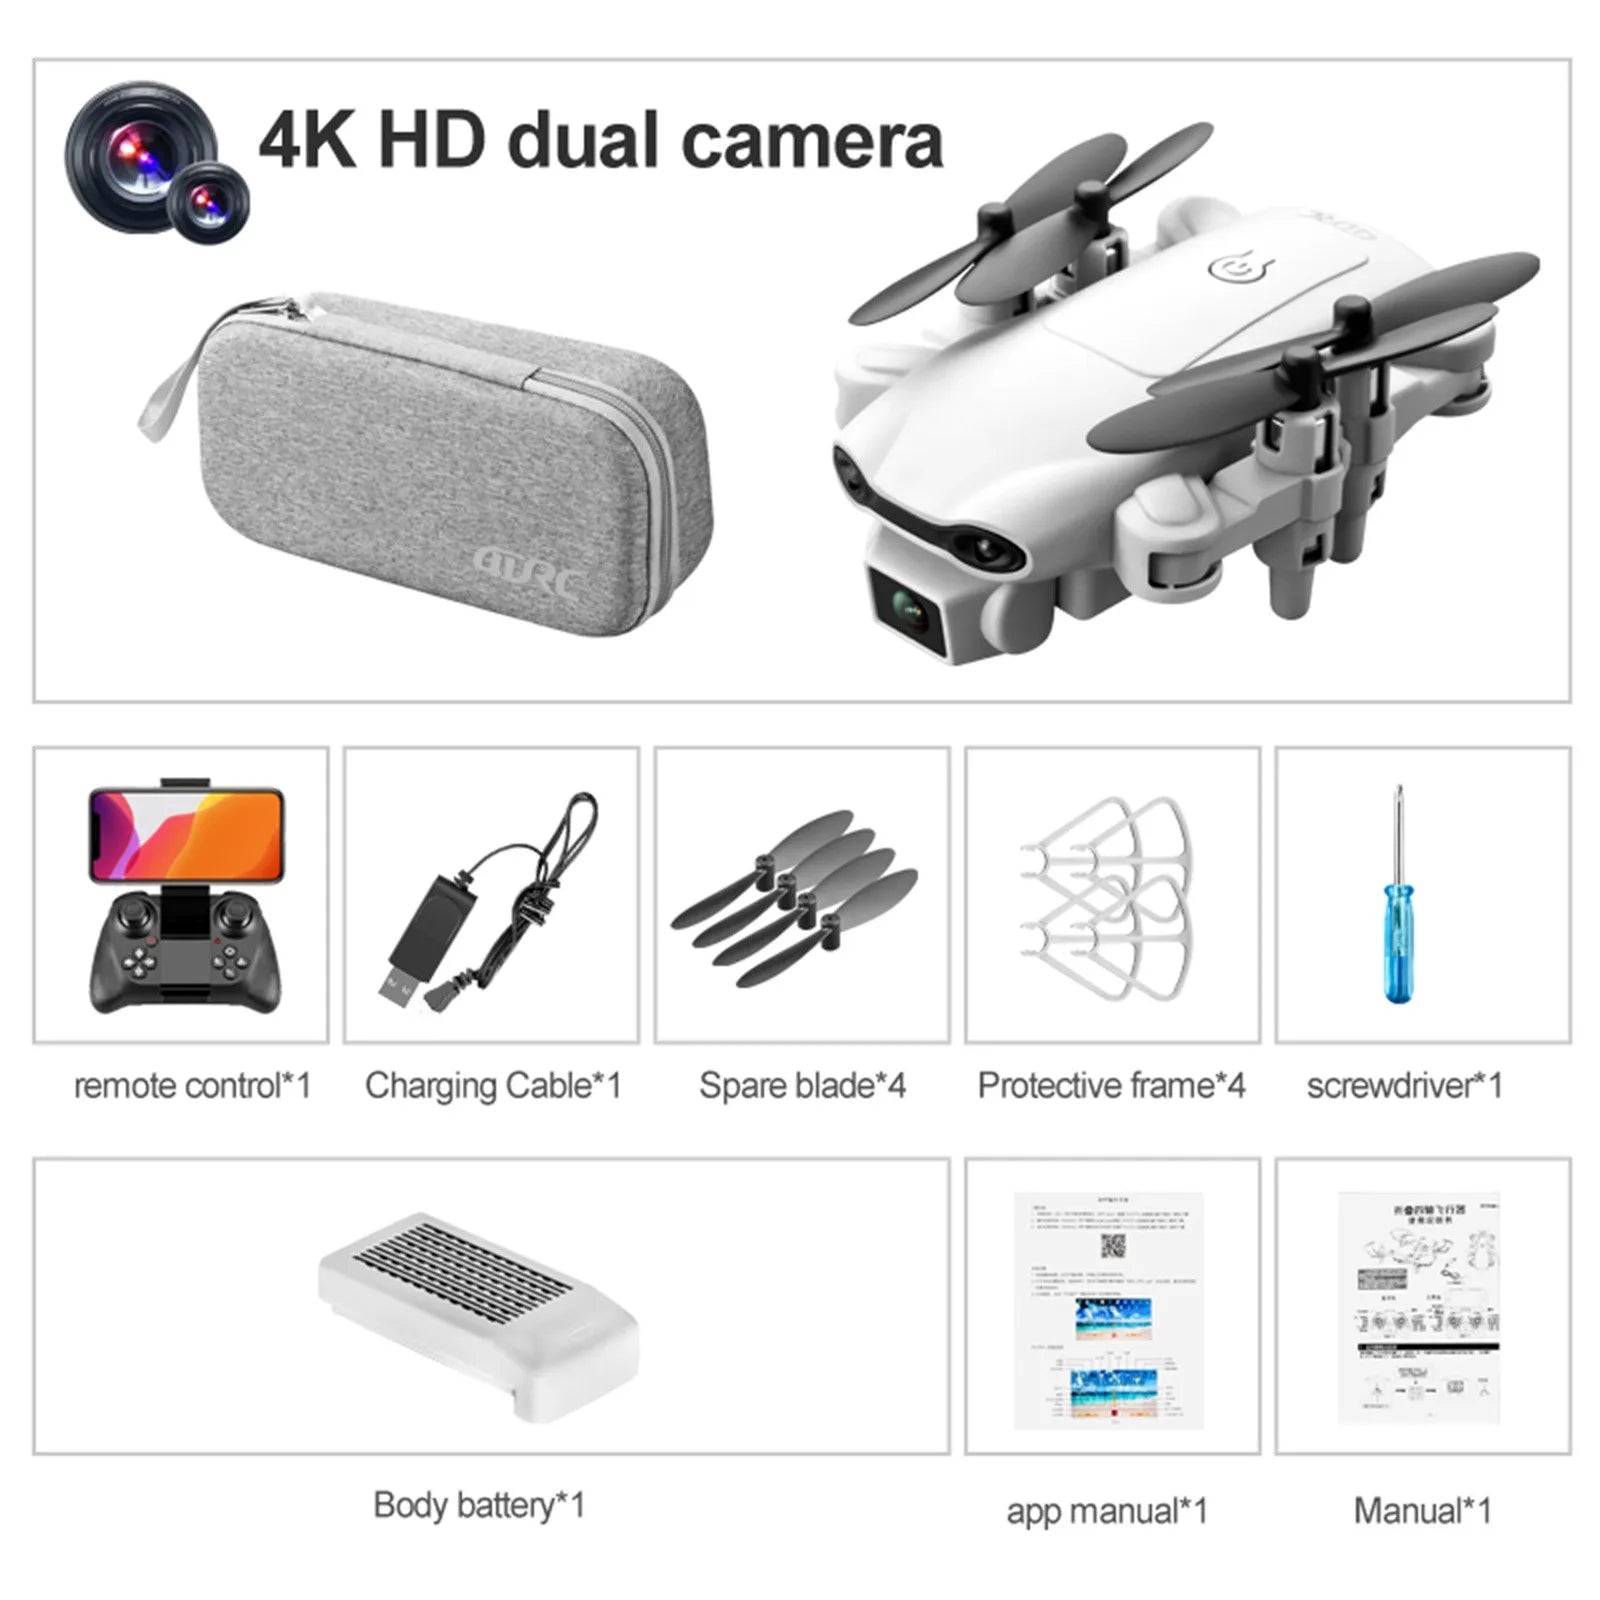 4DRC V9 Drone, 4k hd dual camera remote control*1 charging cable*